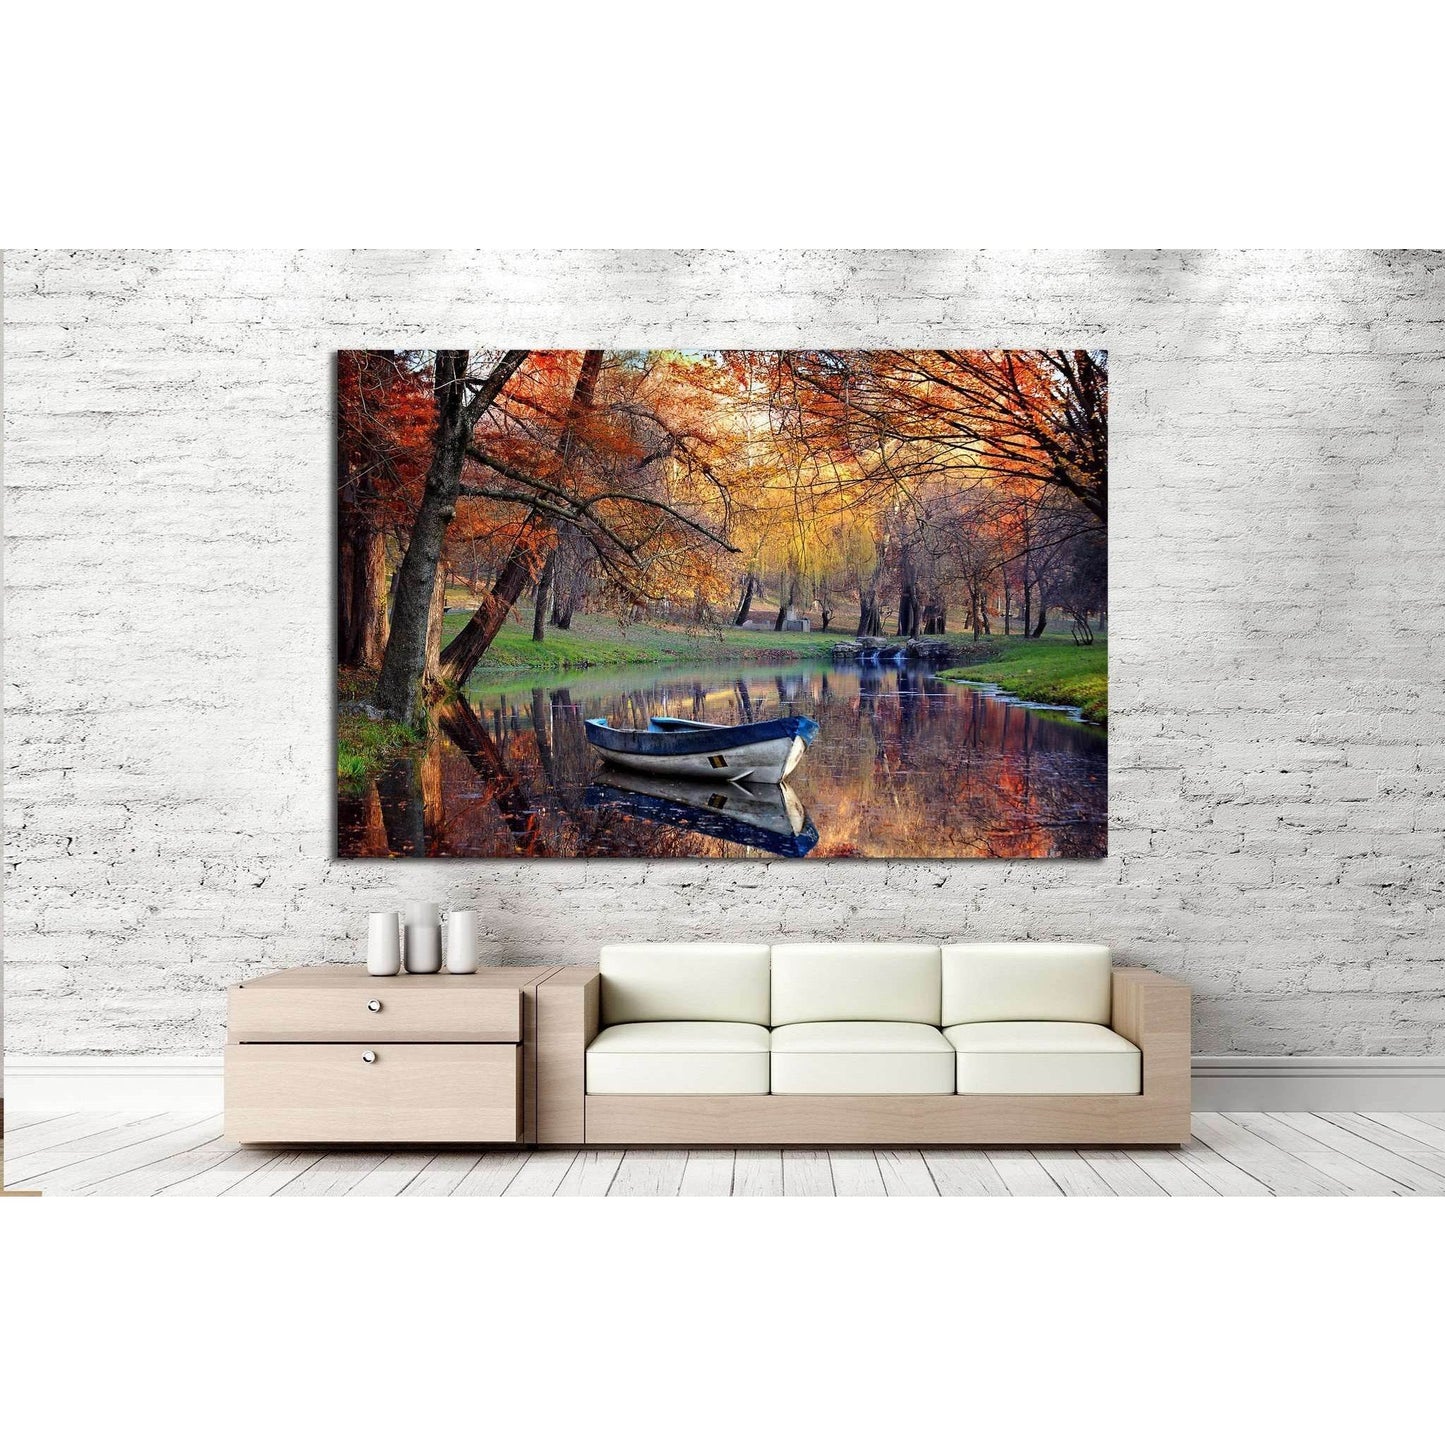 Autumn River Canvas Print for Cozy Living Room WallThis canvas print captures an autumnal scene with a solitary boat on a tranquil river, reflecting the fiery hues of fall foliage. Perfect for adding a touch of natural serenity to any living room or dinin